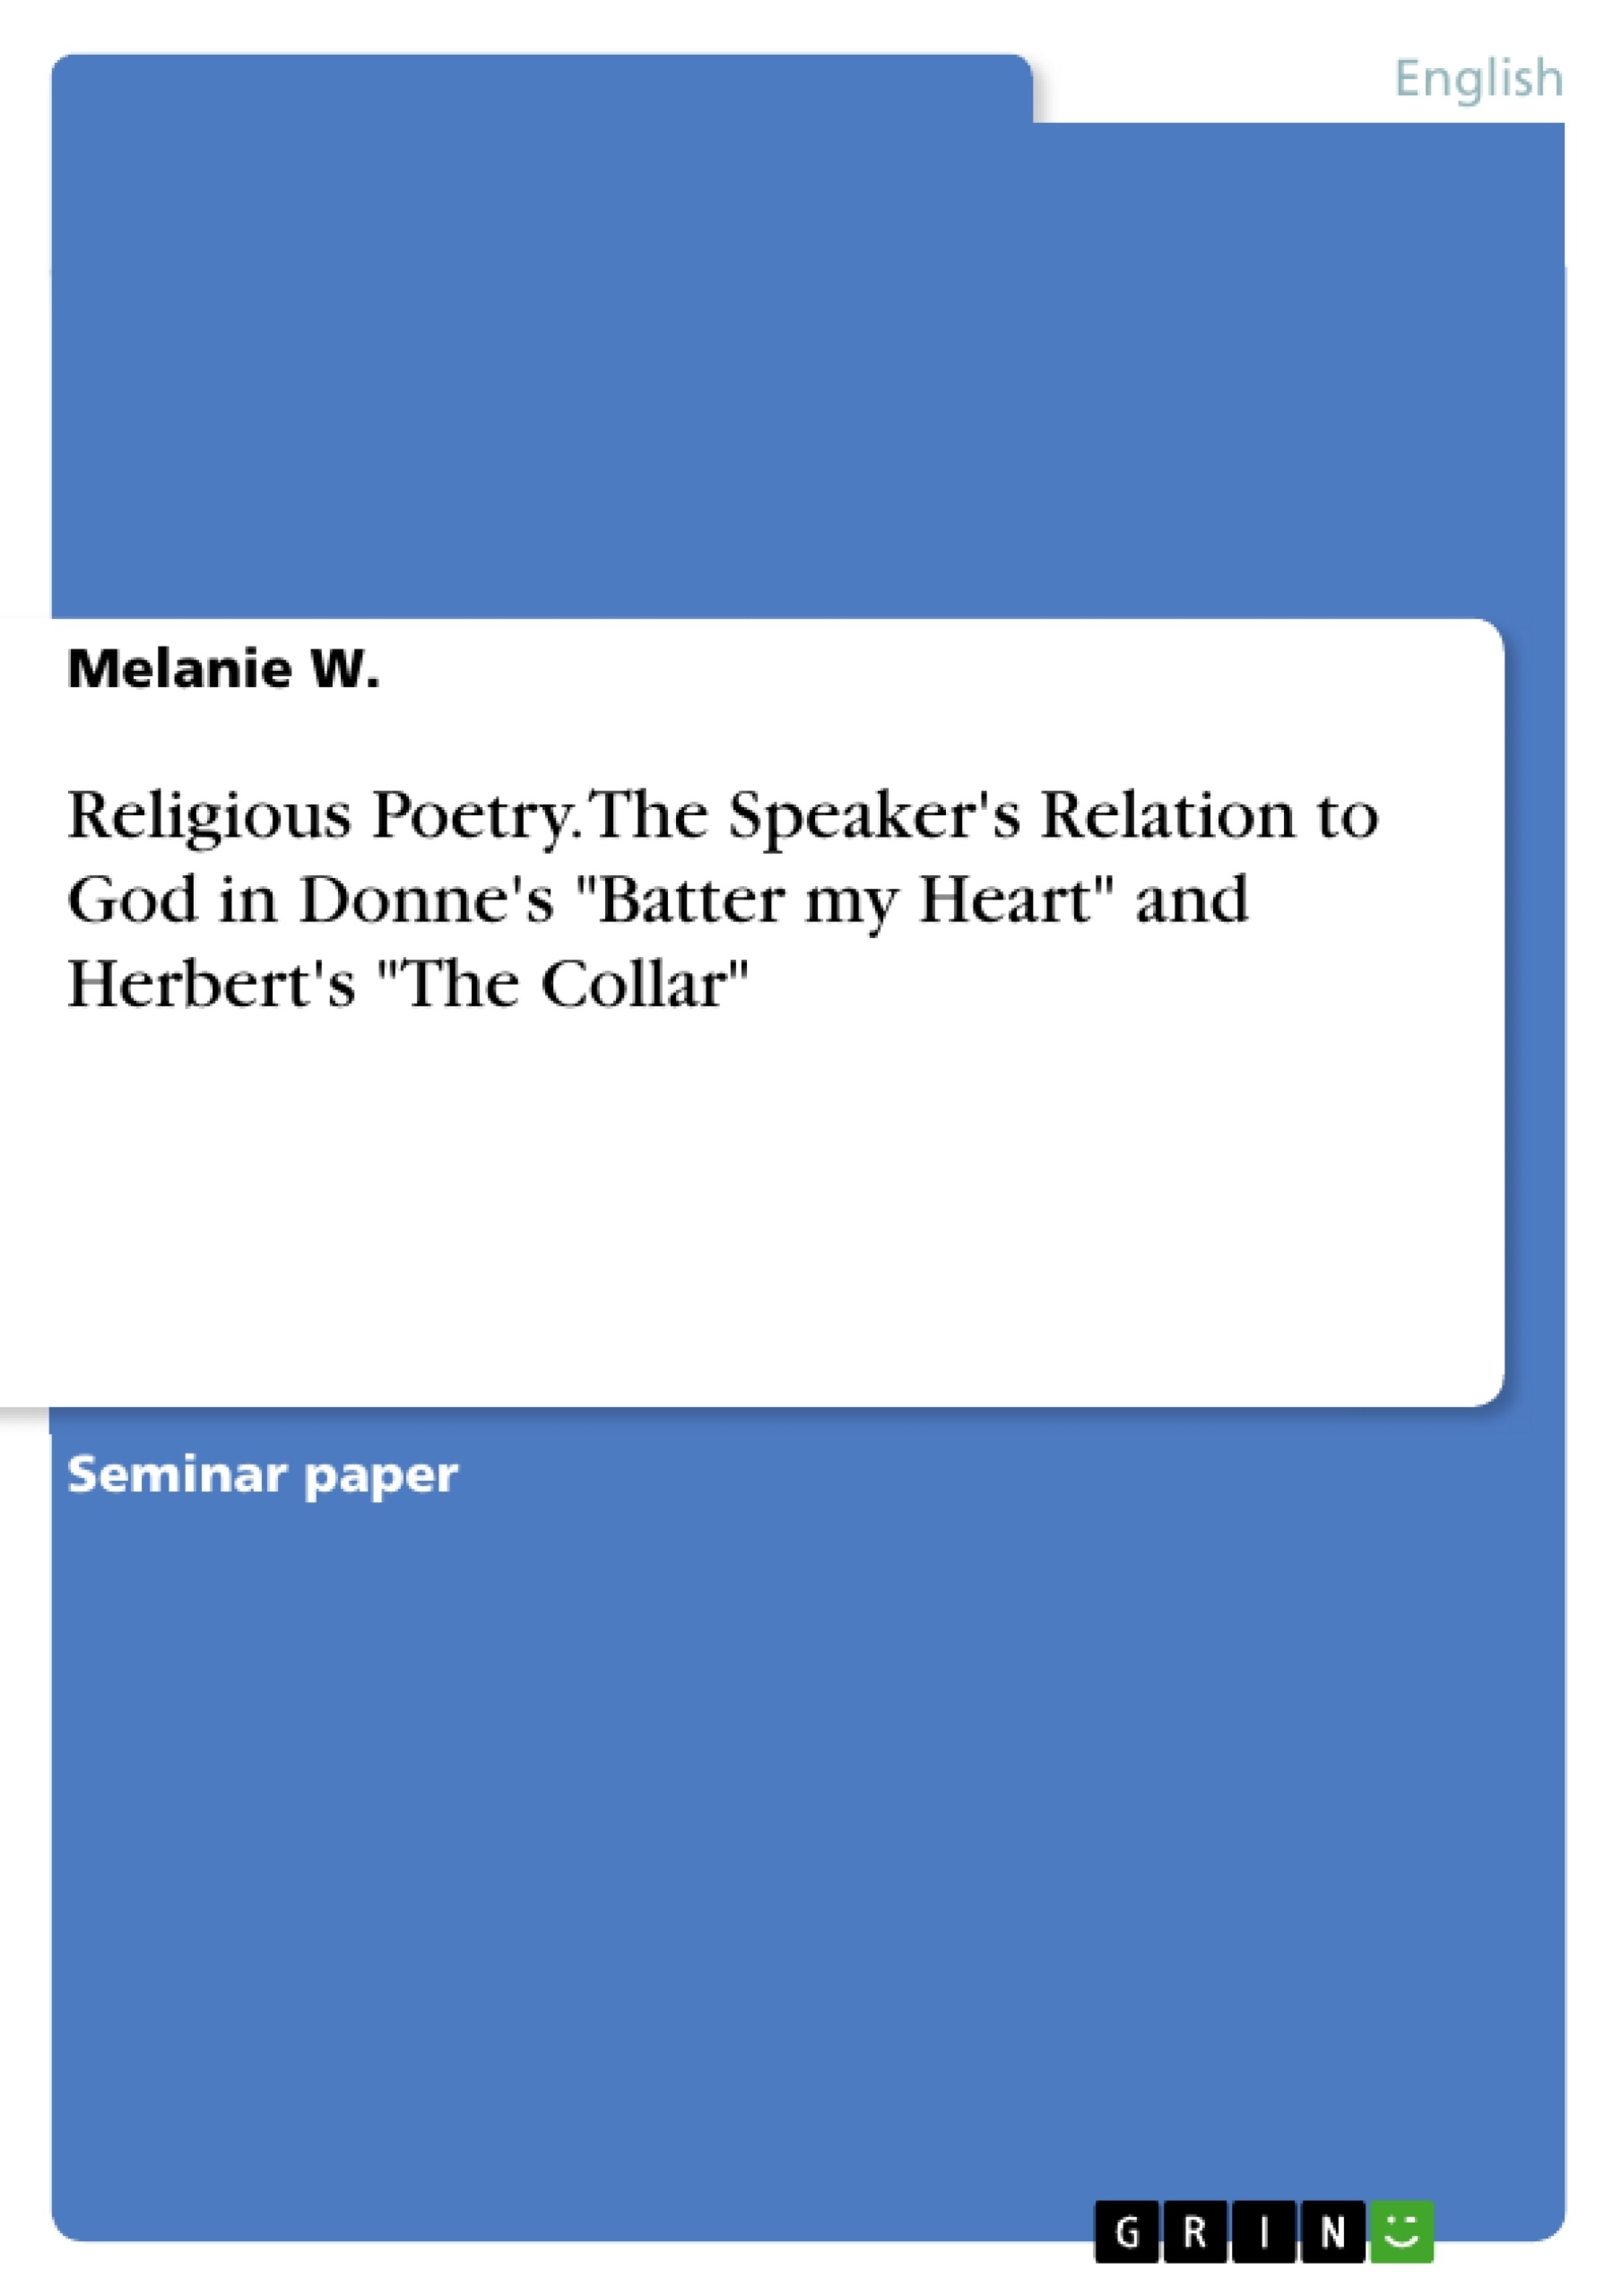 Titre: Religious Poetry. The Speaker's Relation to God in Donne's "Batter my Heart" and Herbert's "The Collar"